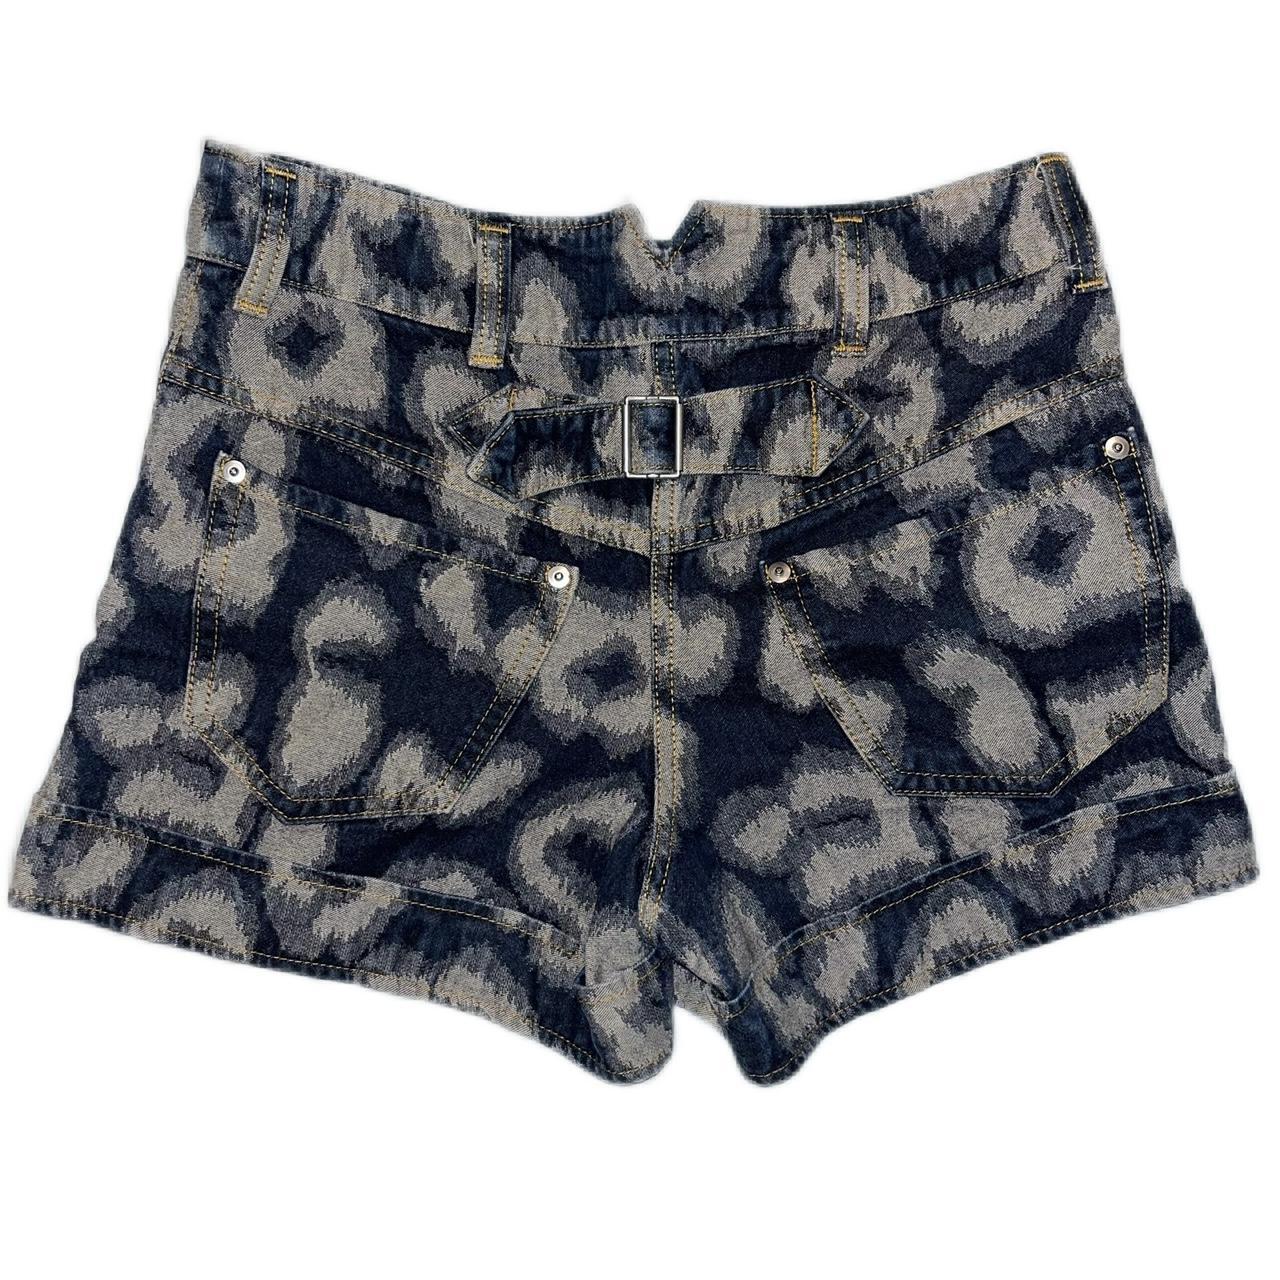 Vivienne Westwood Women's Navy and Blue Shorts (2)